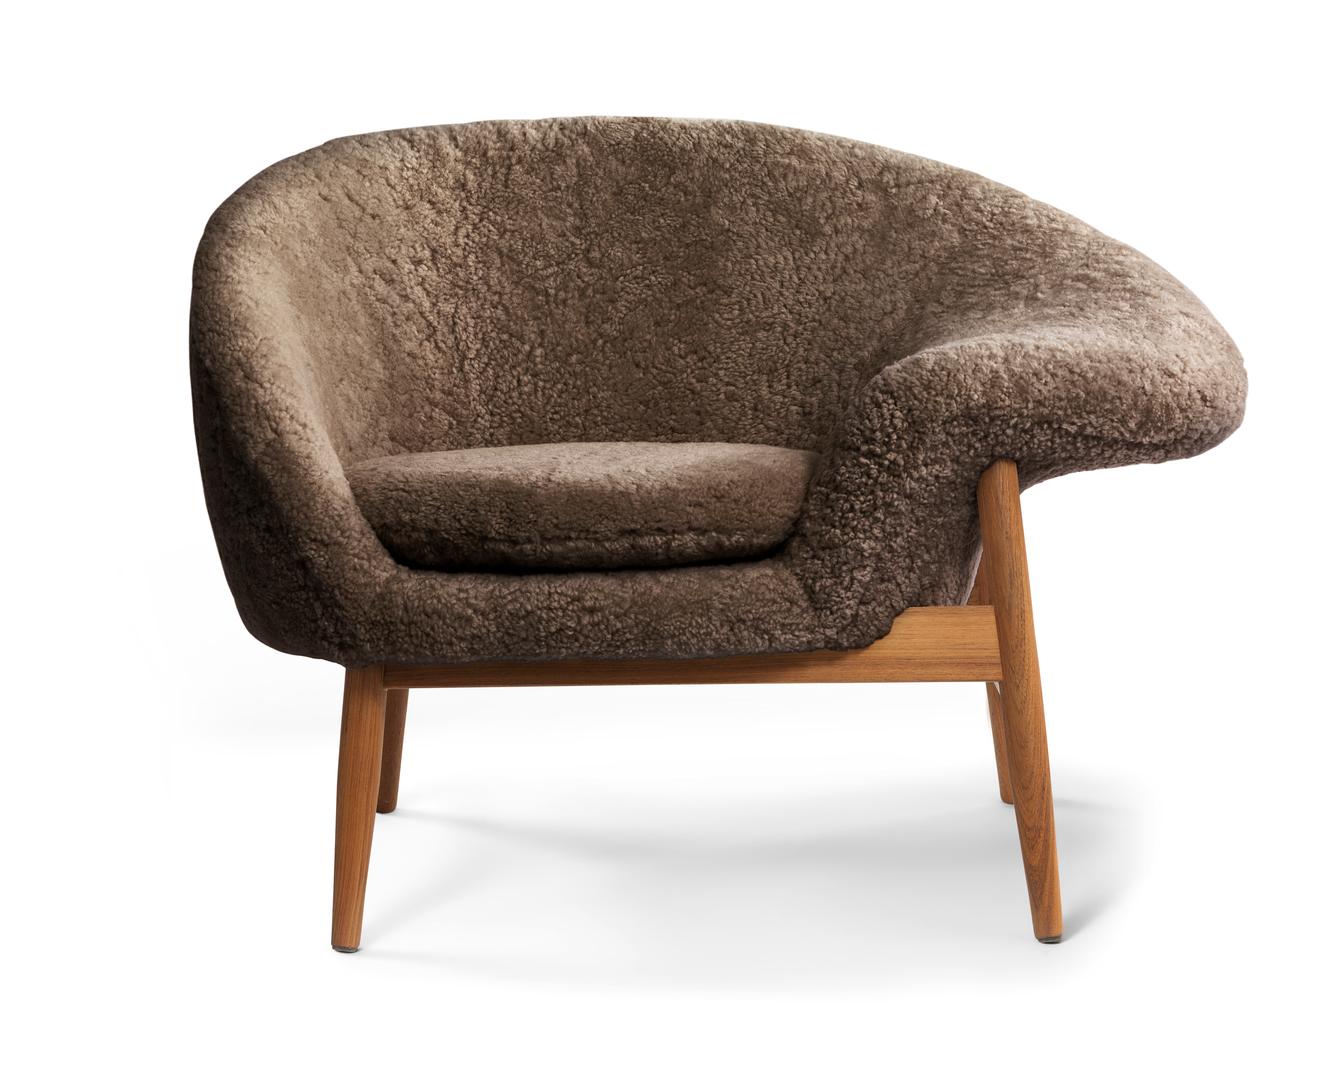 Fried Egg Right Lounge Chair Sheepskin Drake by Warm Nordic
Dimensions: D99 x W68 x H 68 cm
Material: Sheepskin, Textile or nubuck upholstery, Solid oiled teak
Weight: 25 kg
Also available in different colours and finishes. Please contact